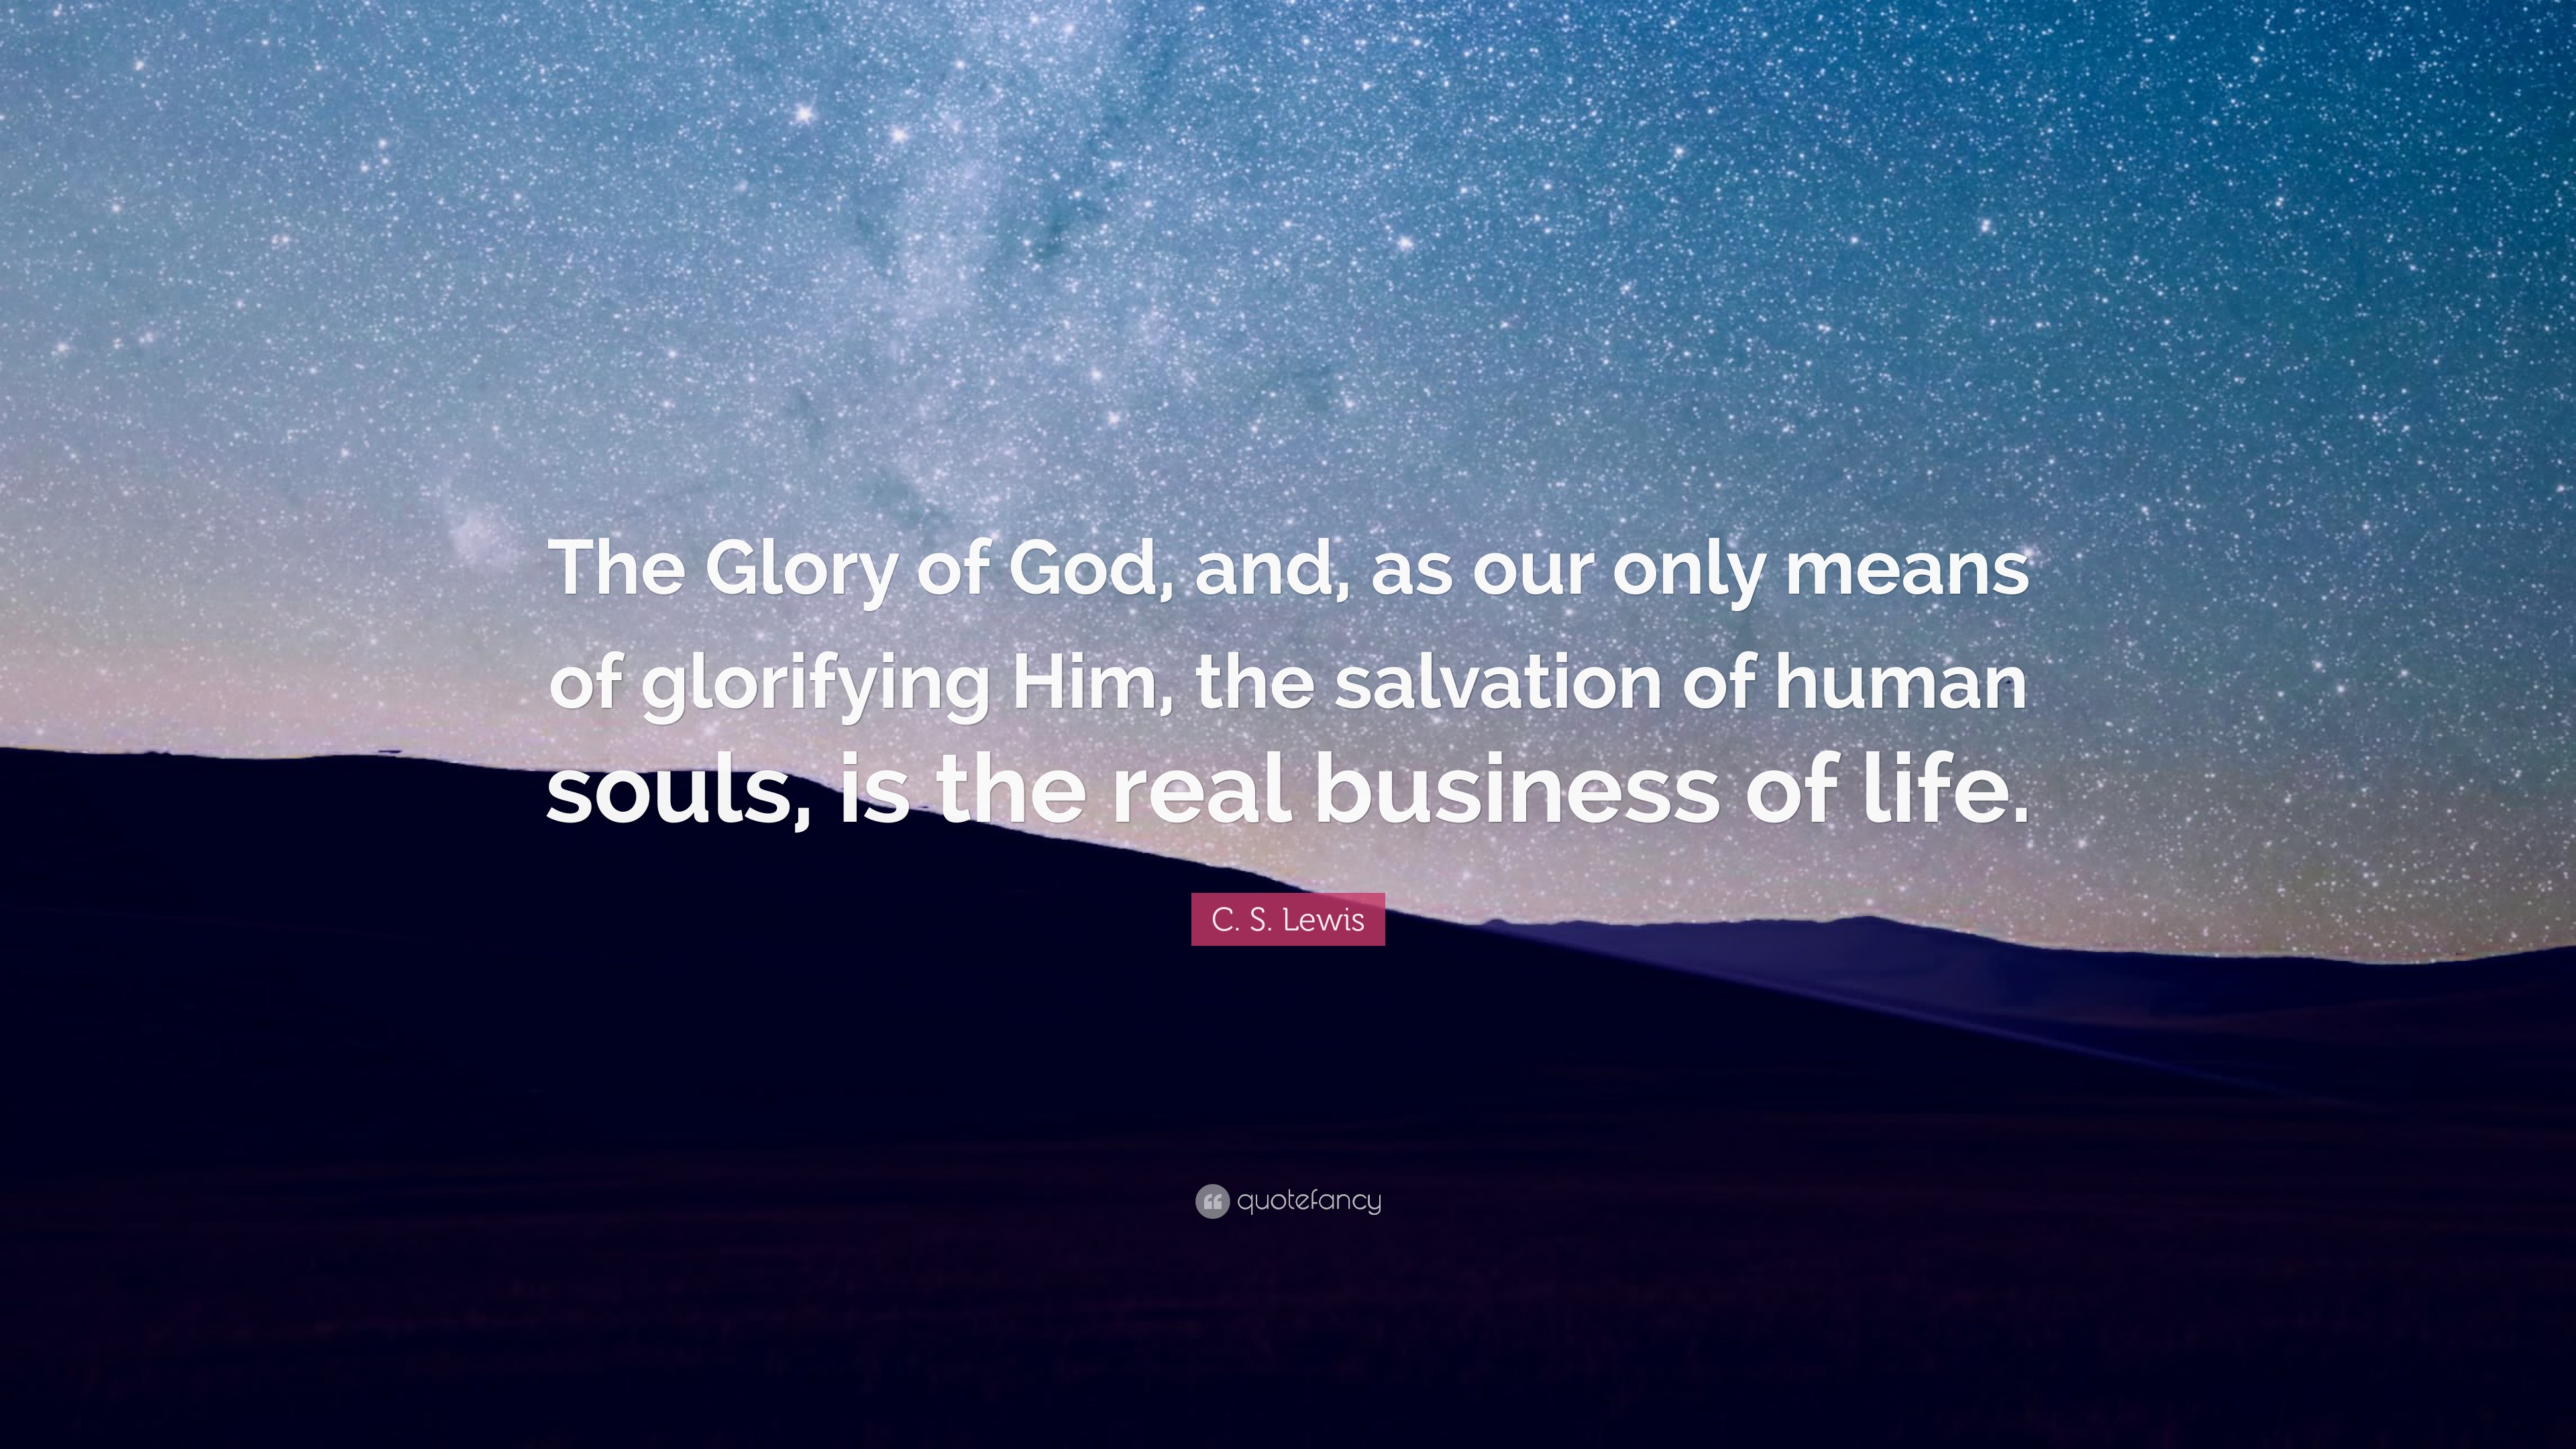 The Manner in Which the Salvation of the Soul is to be Sought by Jonathan Edwards